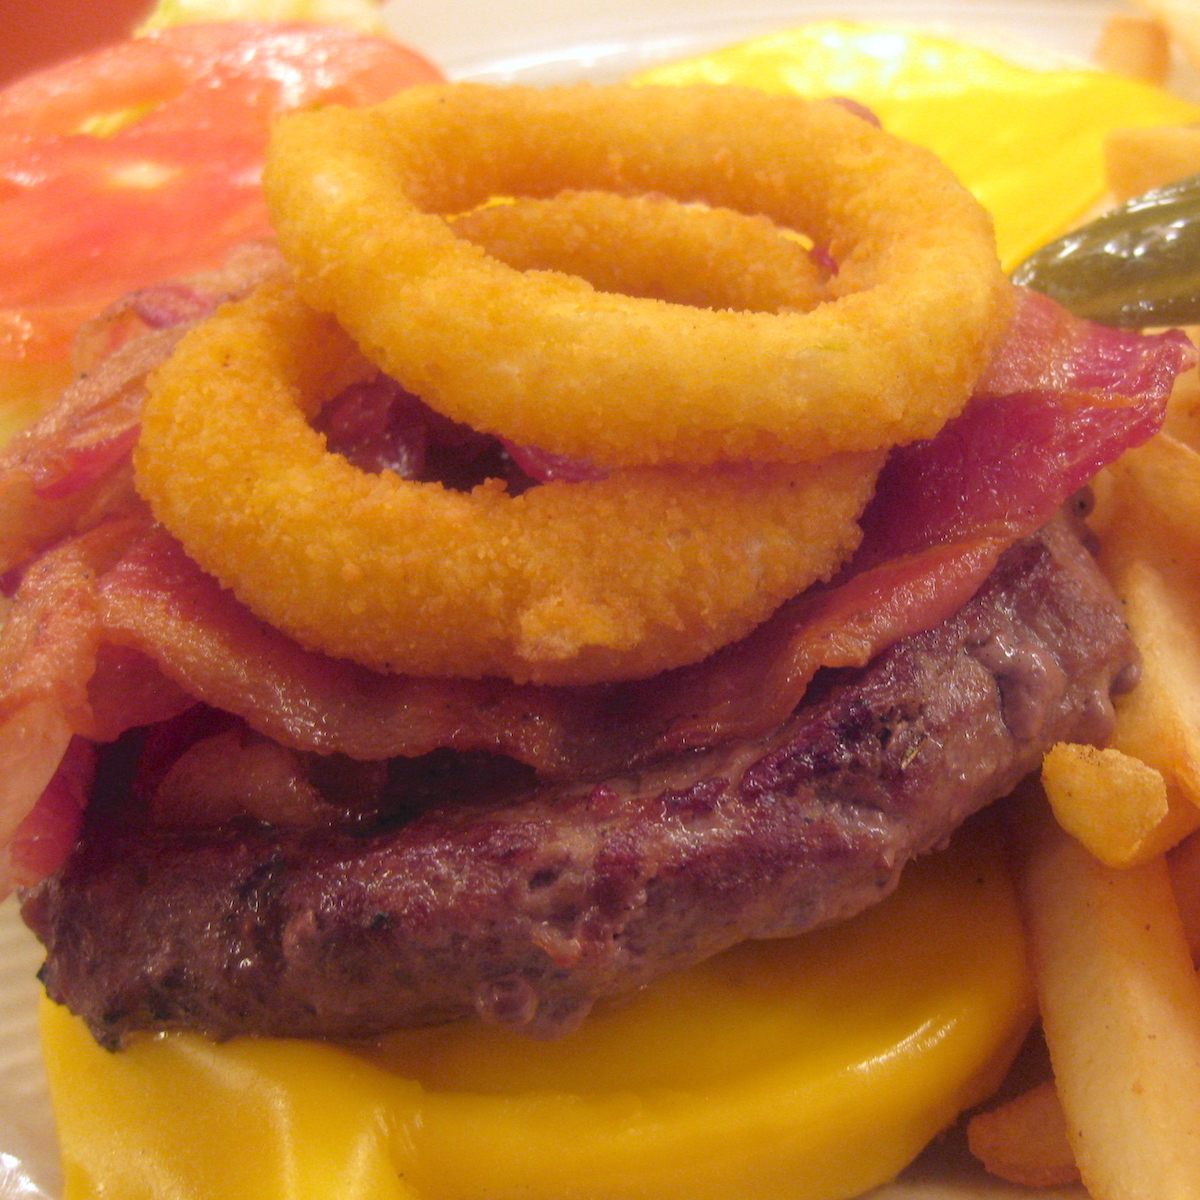 BBQ Cheeseburger from Jahn's Ice Cream Parlour in Jackson Heights, Queens, New York